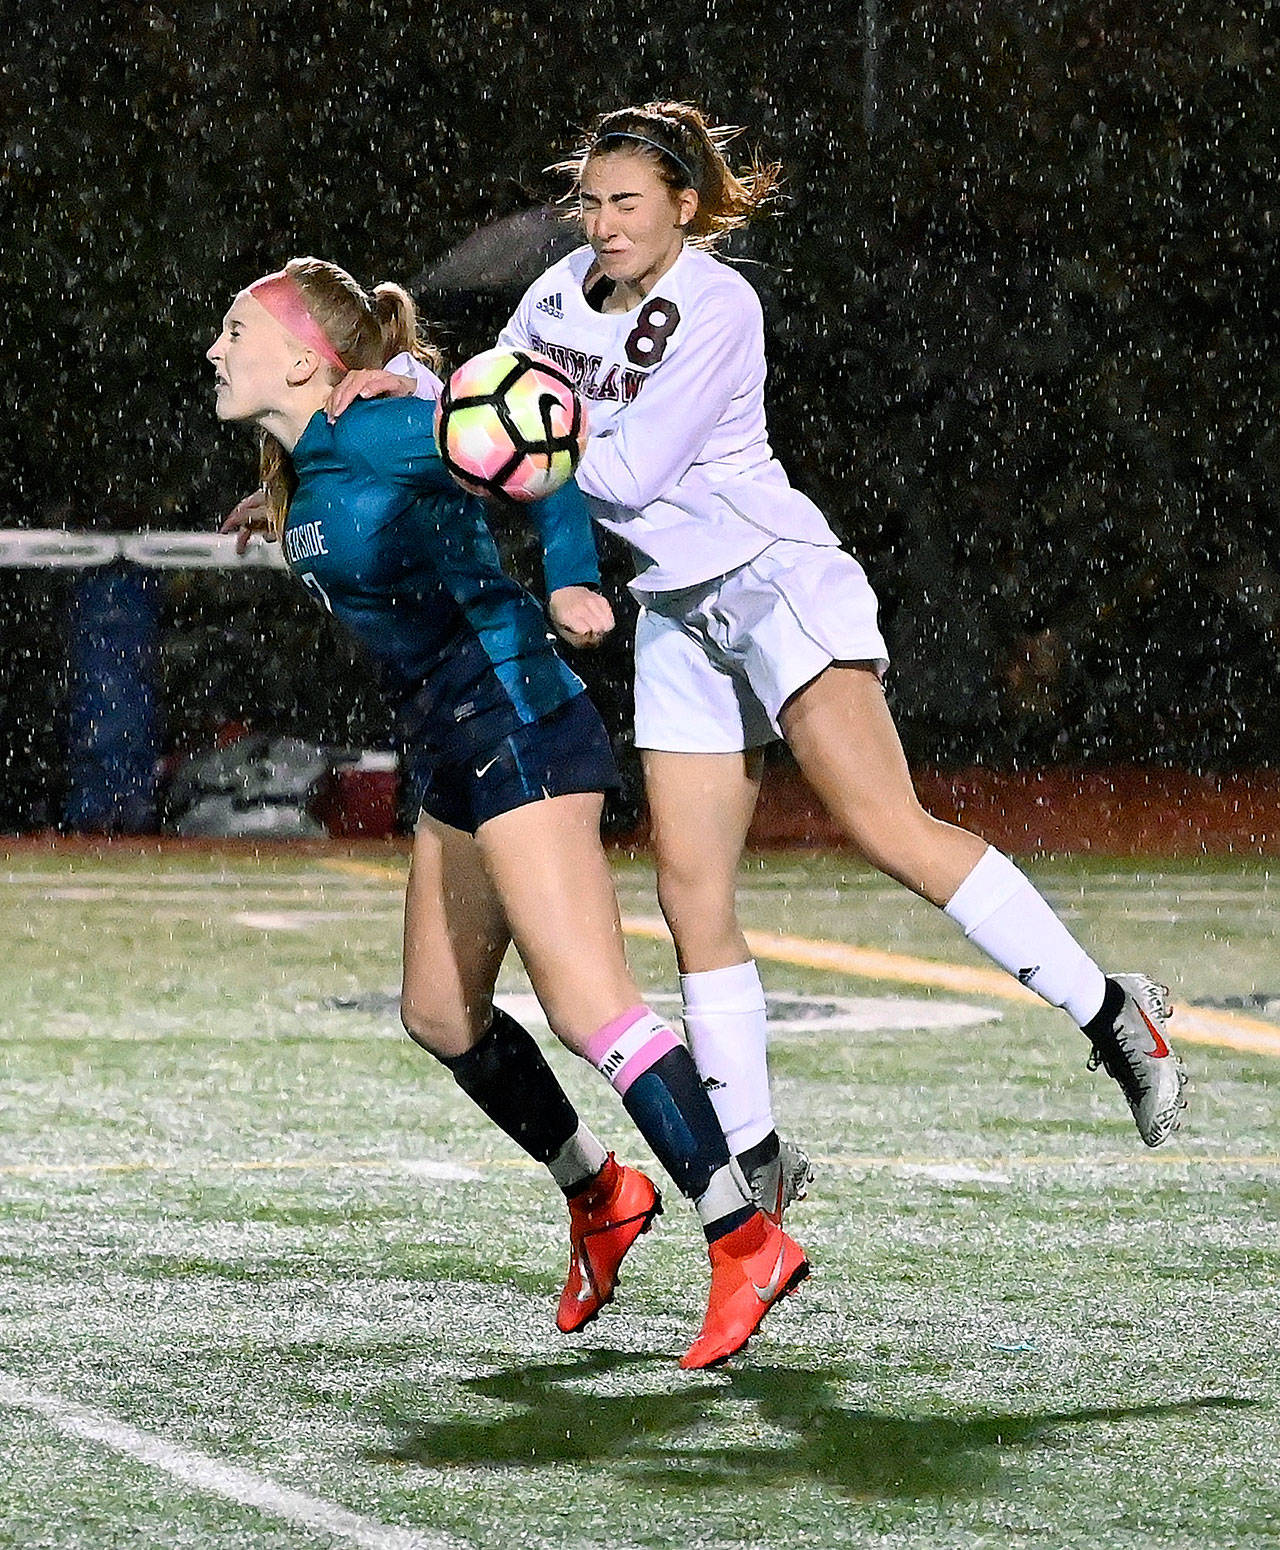 Auburn Riverside’s Kayla Rydberg, left, and Enumclaw’s Nicole Huff vie for the ball during a wet, gusty first half of their NPSL Olympic Division soccer match in October at Auburn Riverside High School. RACHEL CIAMPI, Auburn Reporter